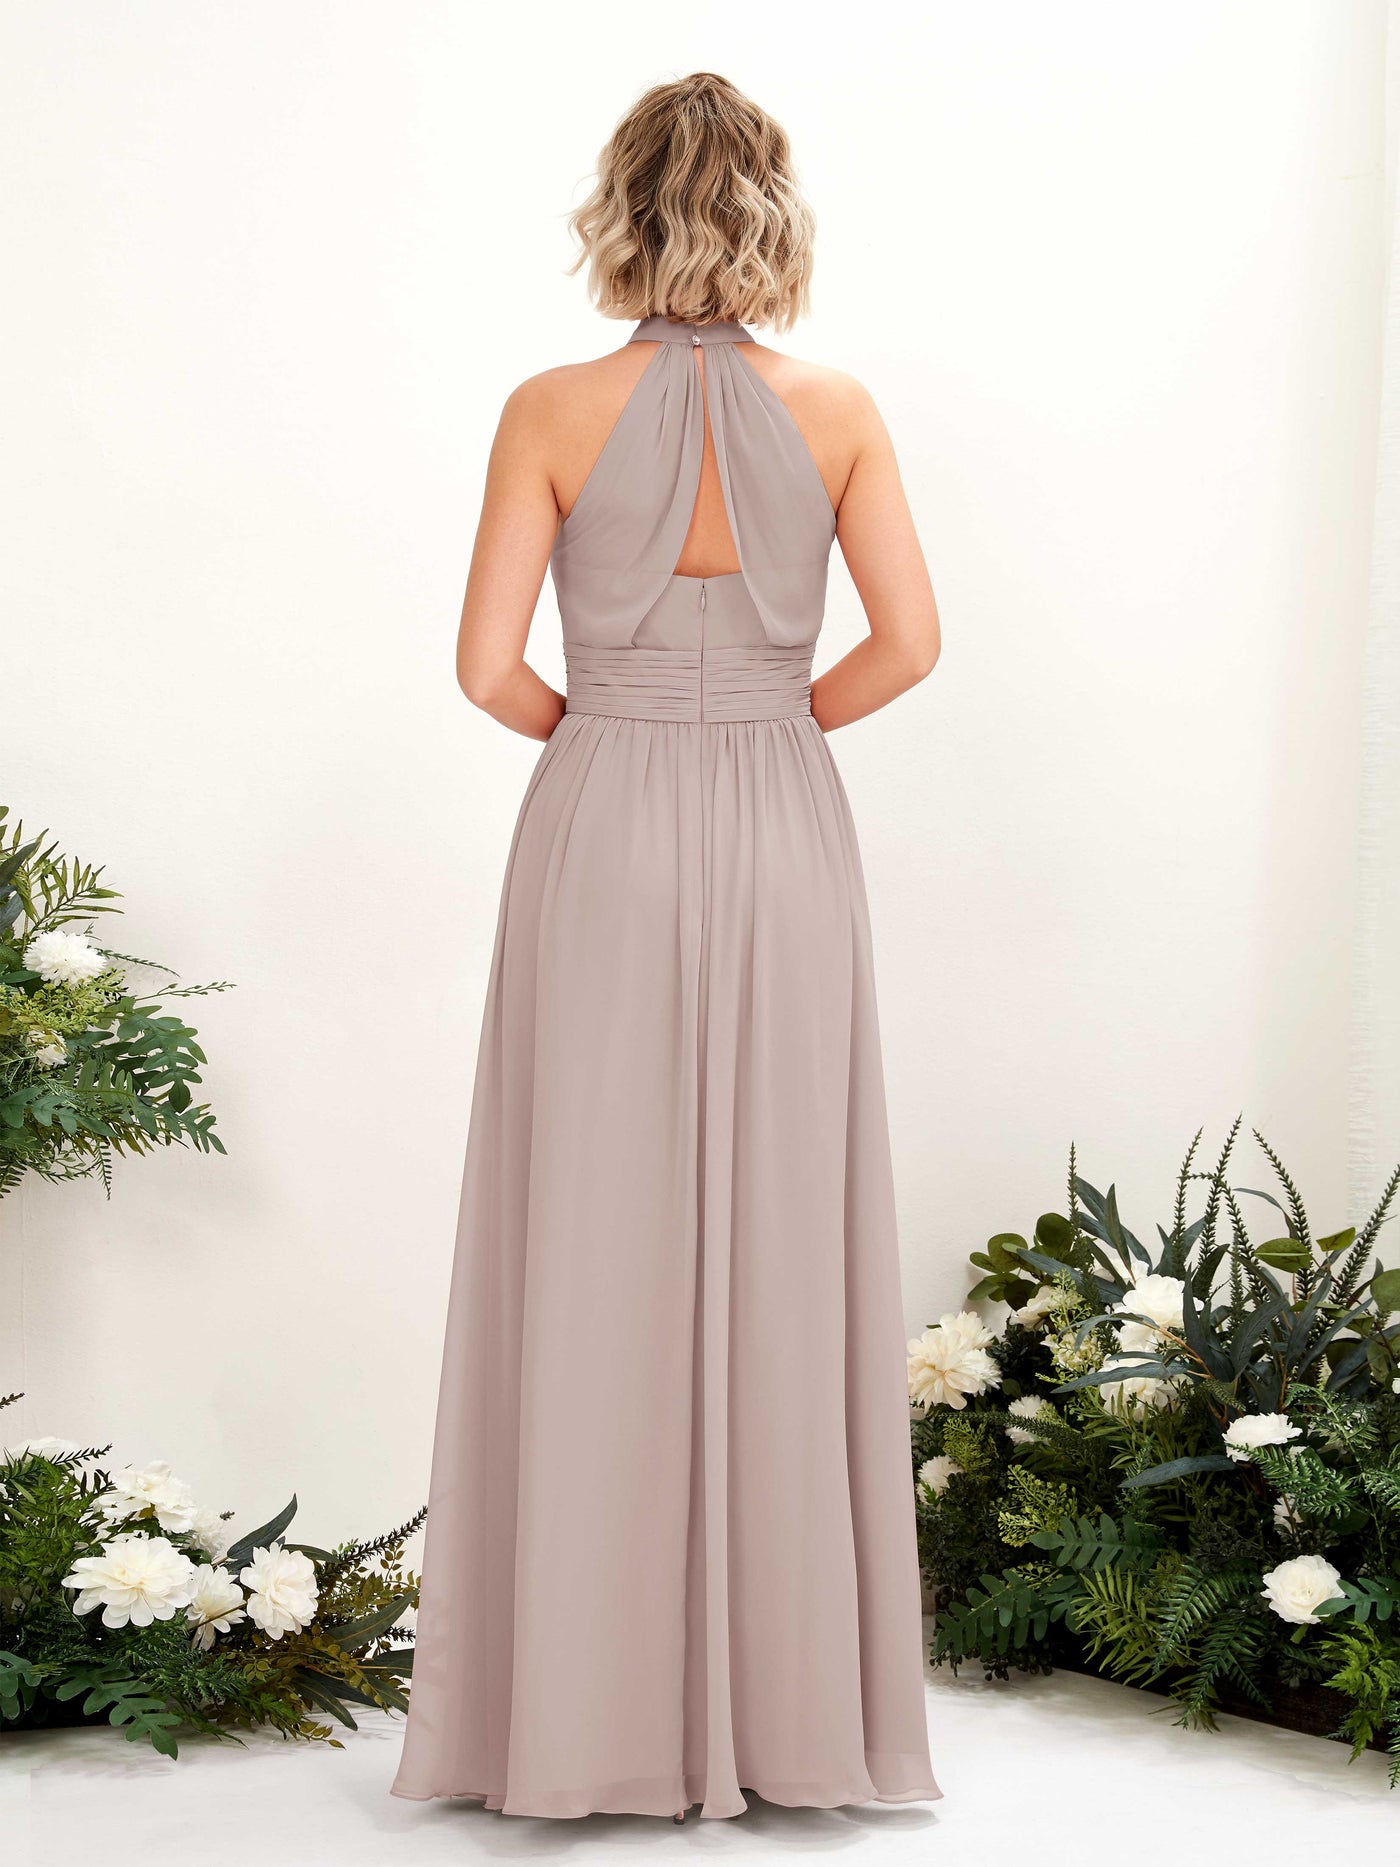 Taupe Bridesmaid Dresses Bridesmaid Dress A-line Chiffon Halter Full Length Sleeveless Wedding Party Dress (81225324)#color_taupe